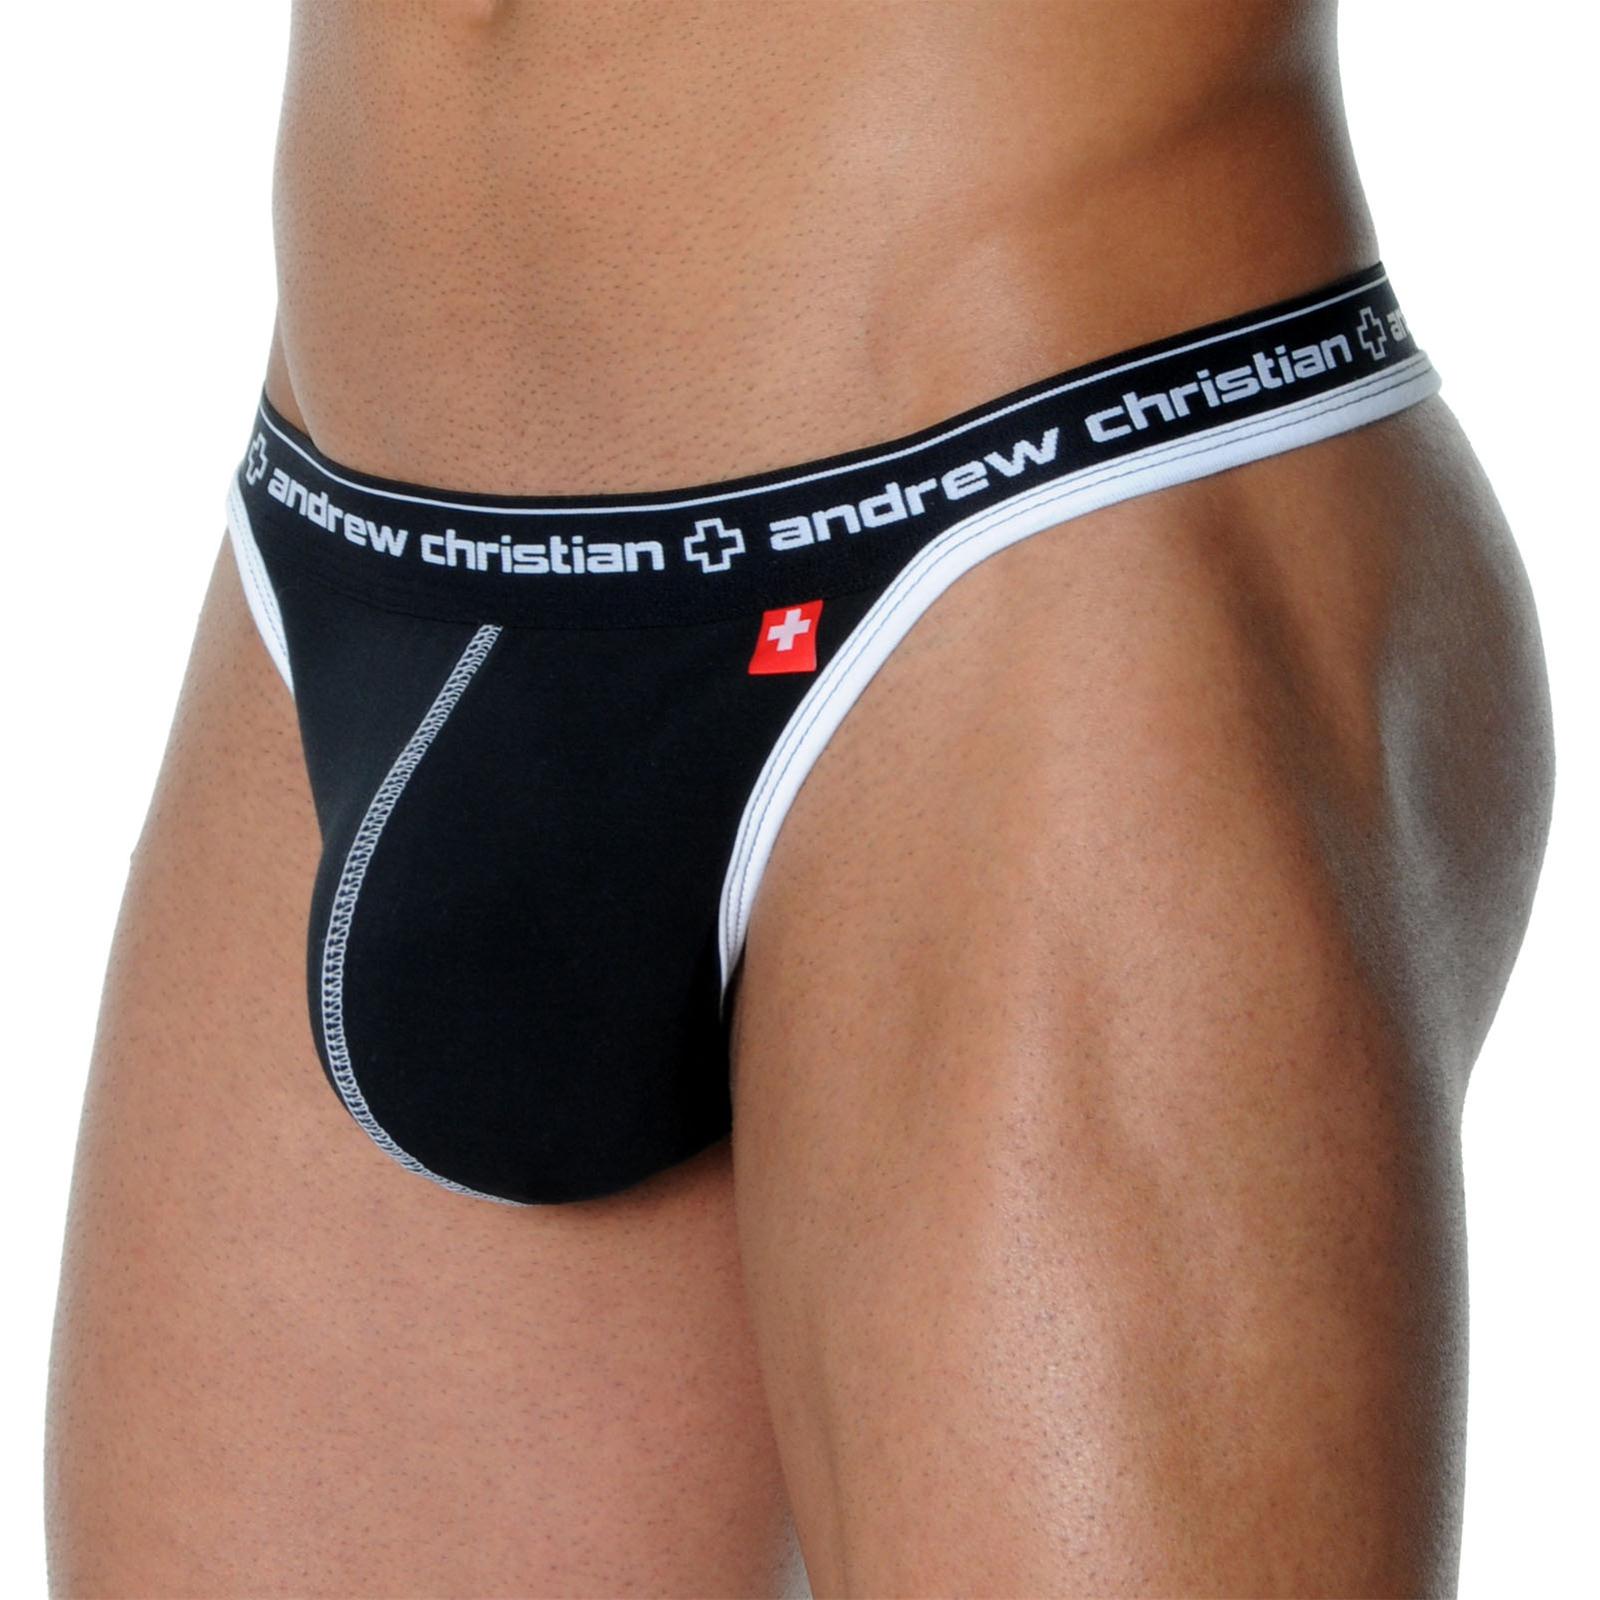 Review: Andrew Christian “Show-It” Thong